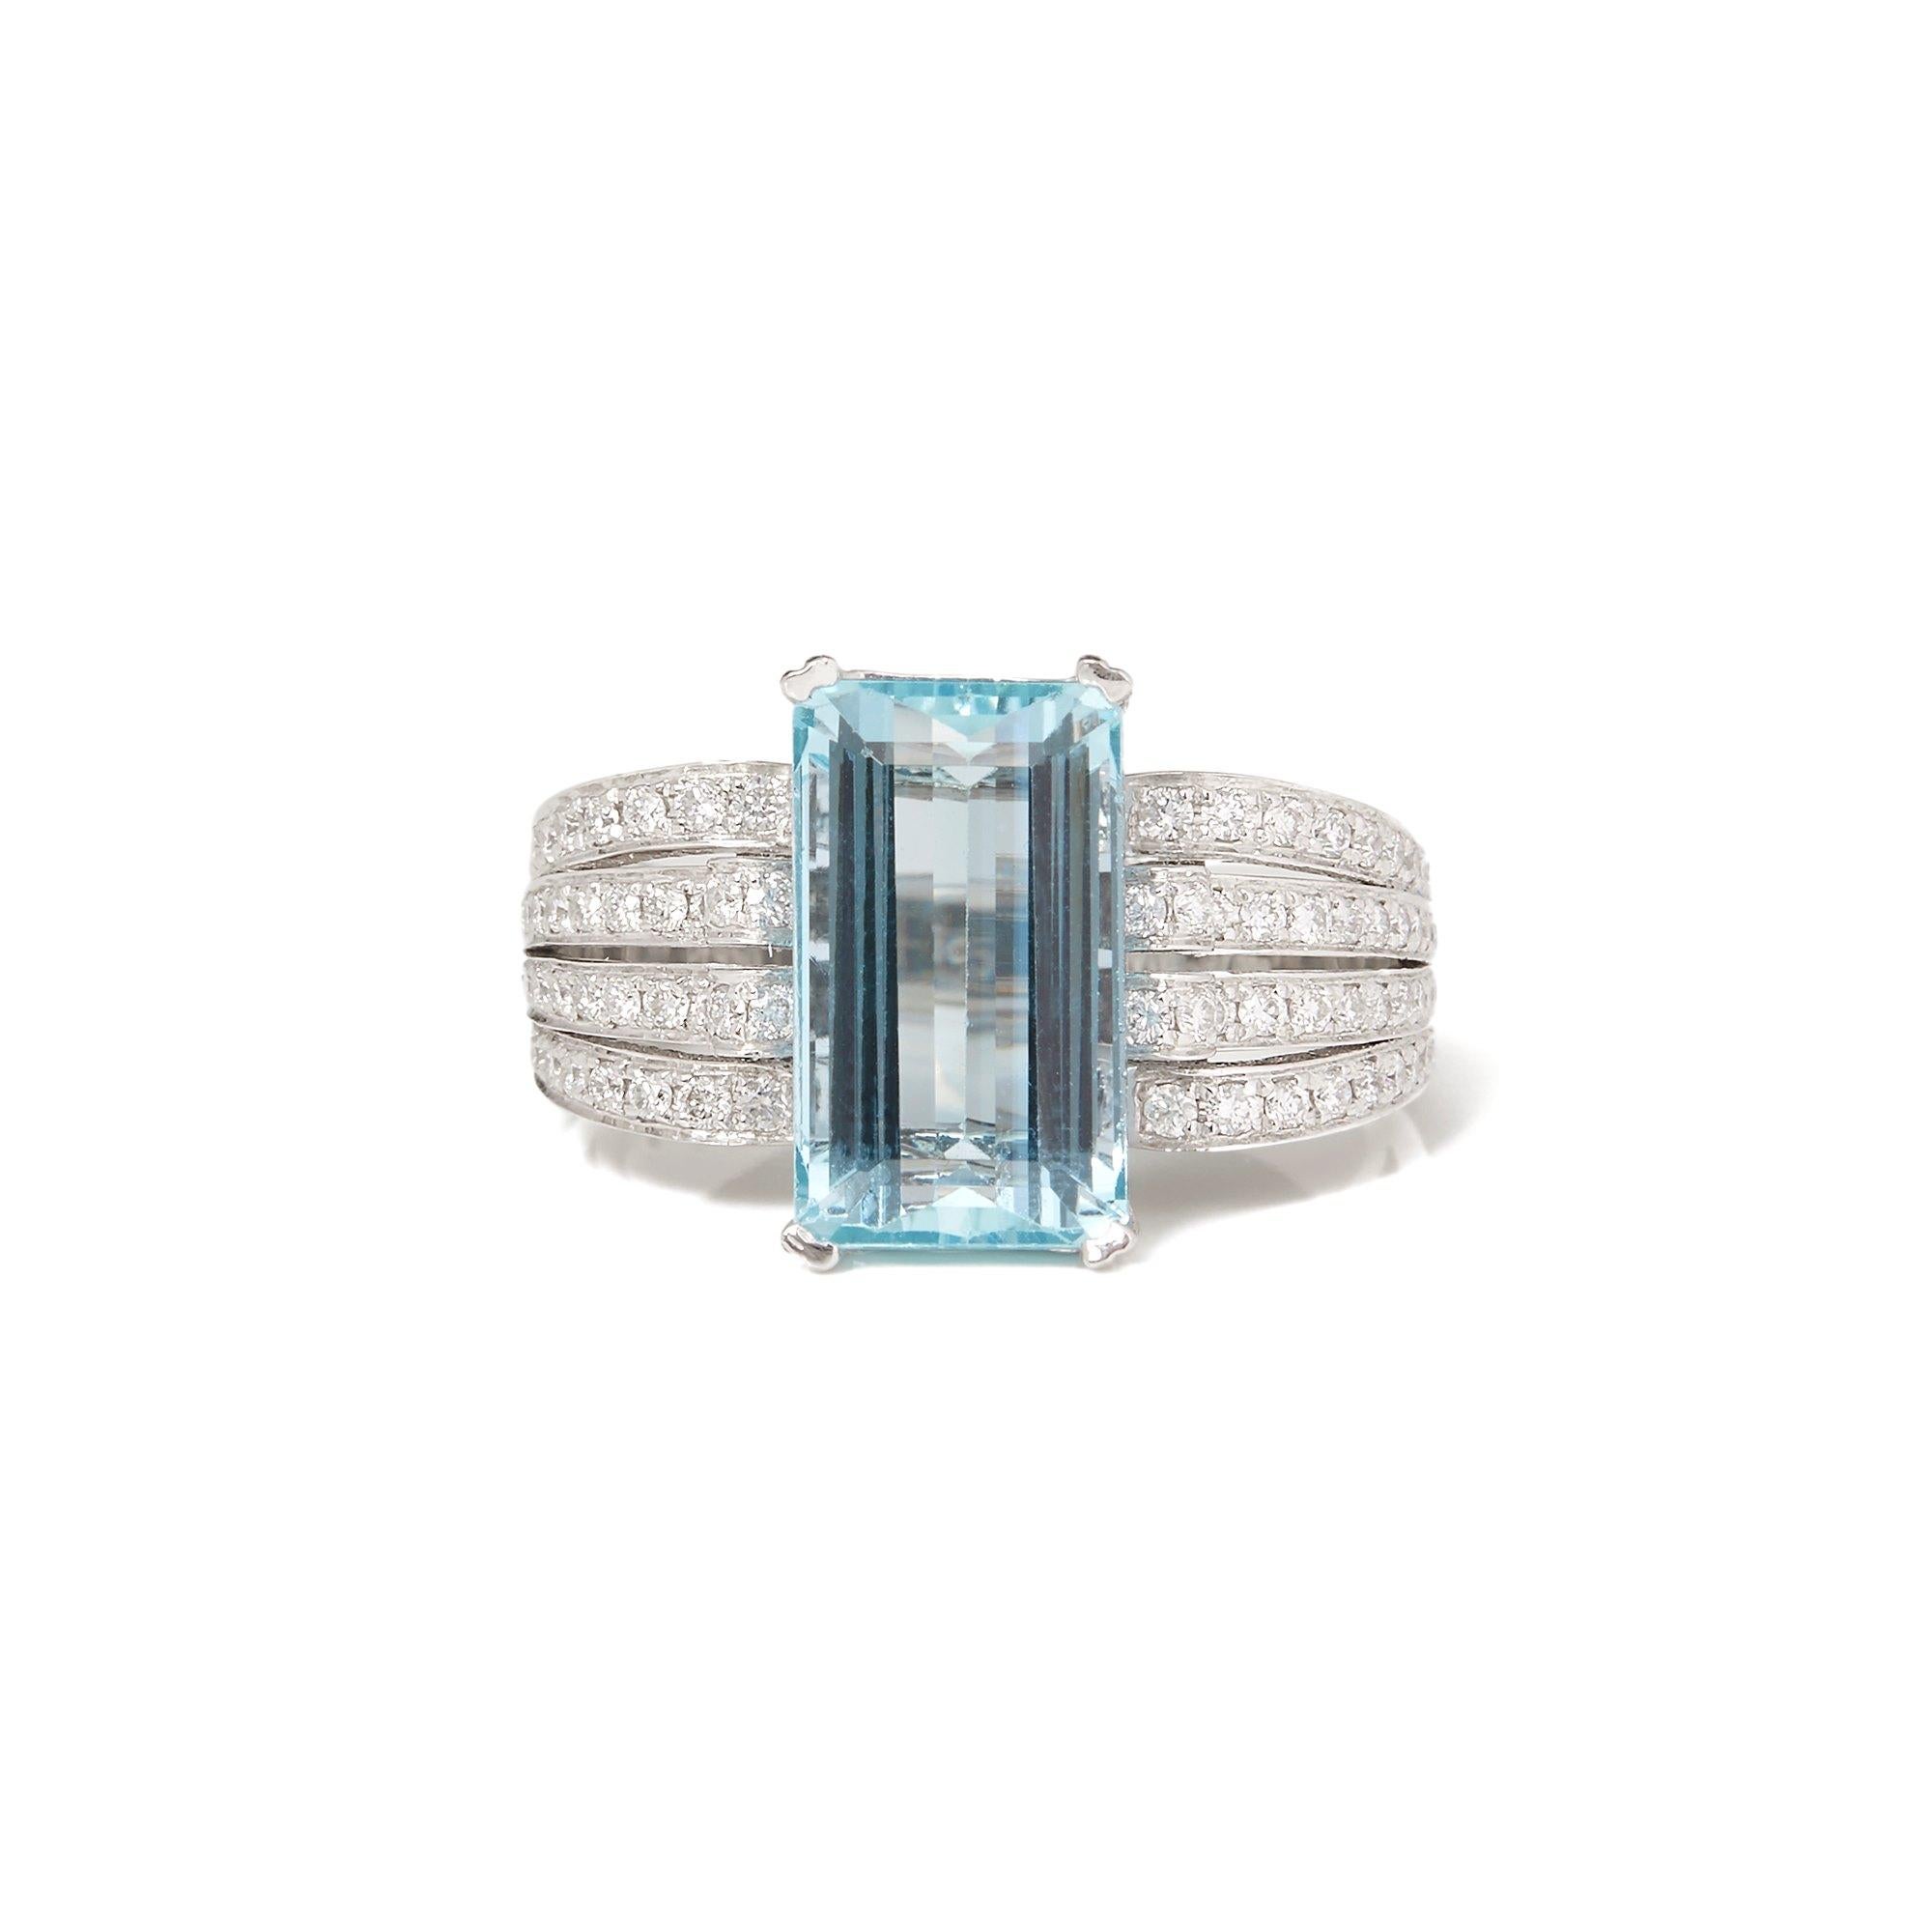 This ring designed by David Jerome is from his private collection and features one Emerald cut Aquamarine totalling 28.31cts sourced in Brazil. Set with round brilliant cut Diamonds totalling 0.36cts mounted in a platinum setting. Finger size UK M